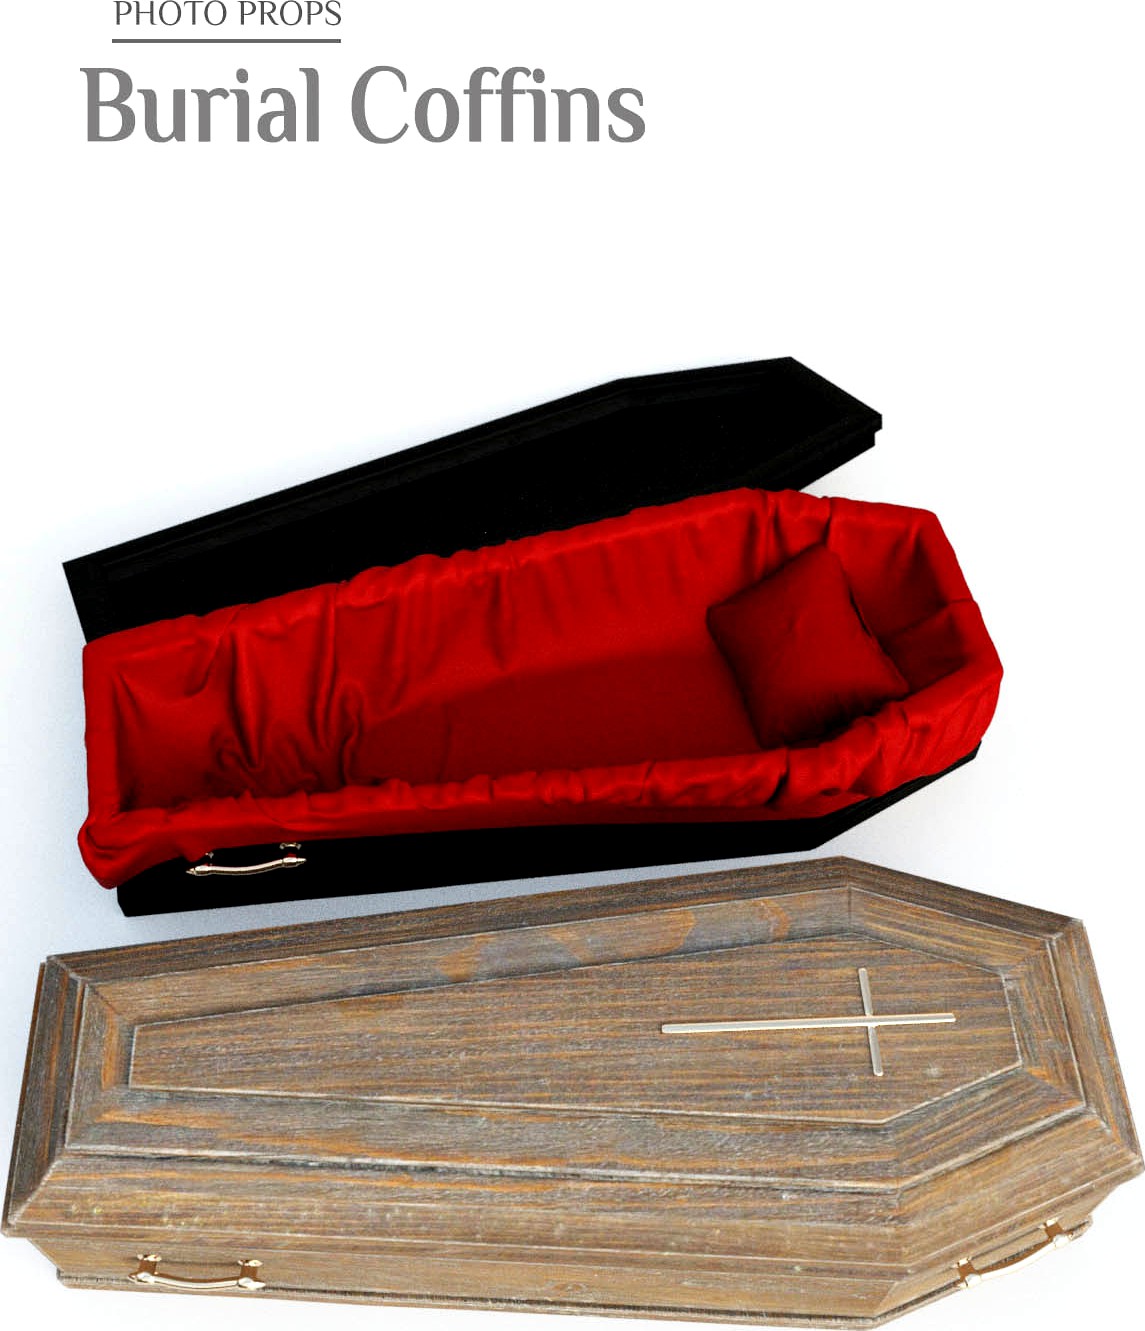 Photo Props: Burial Coffins